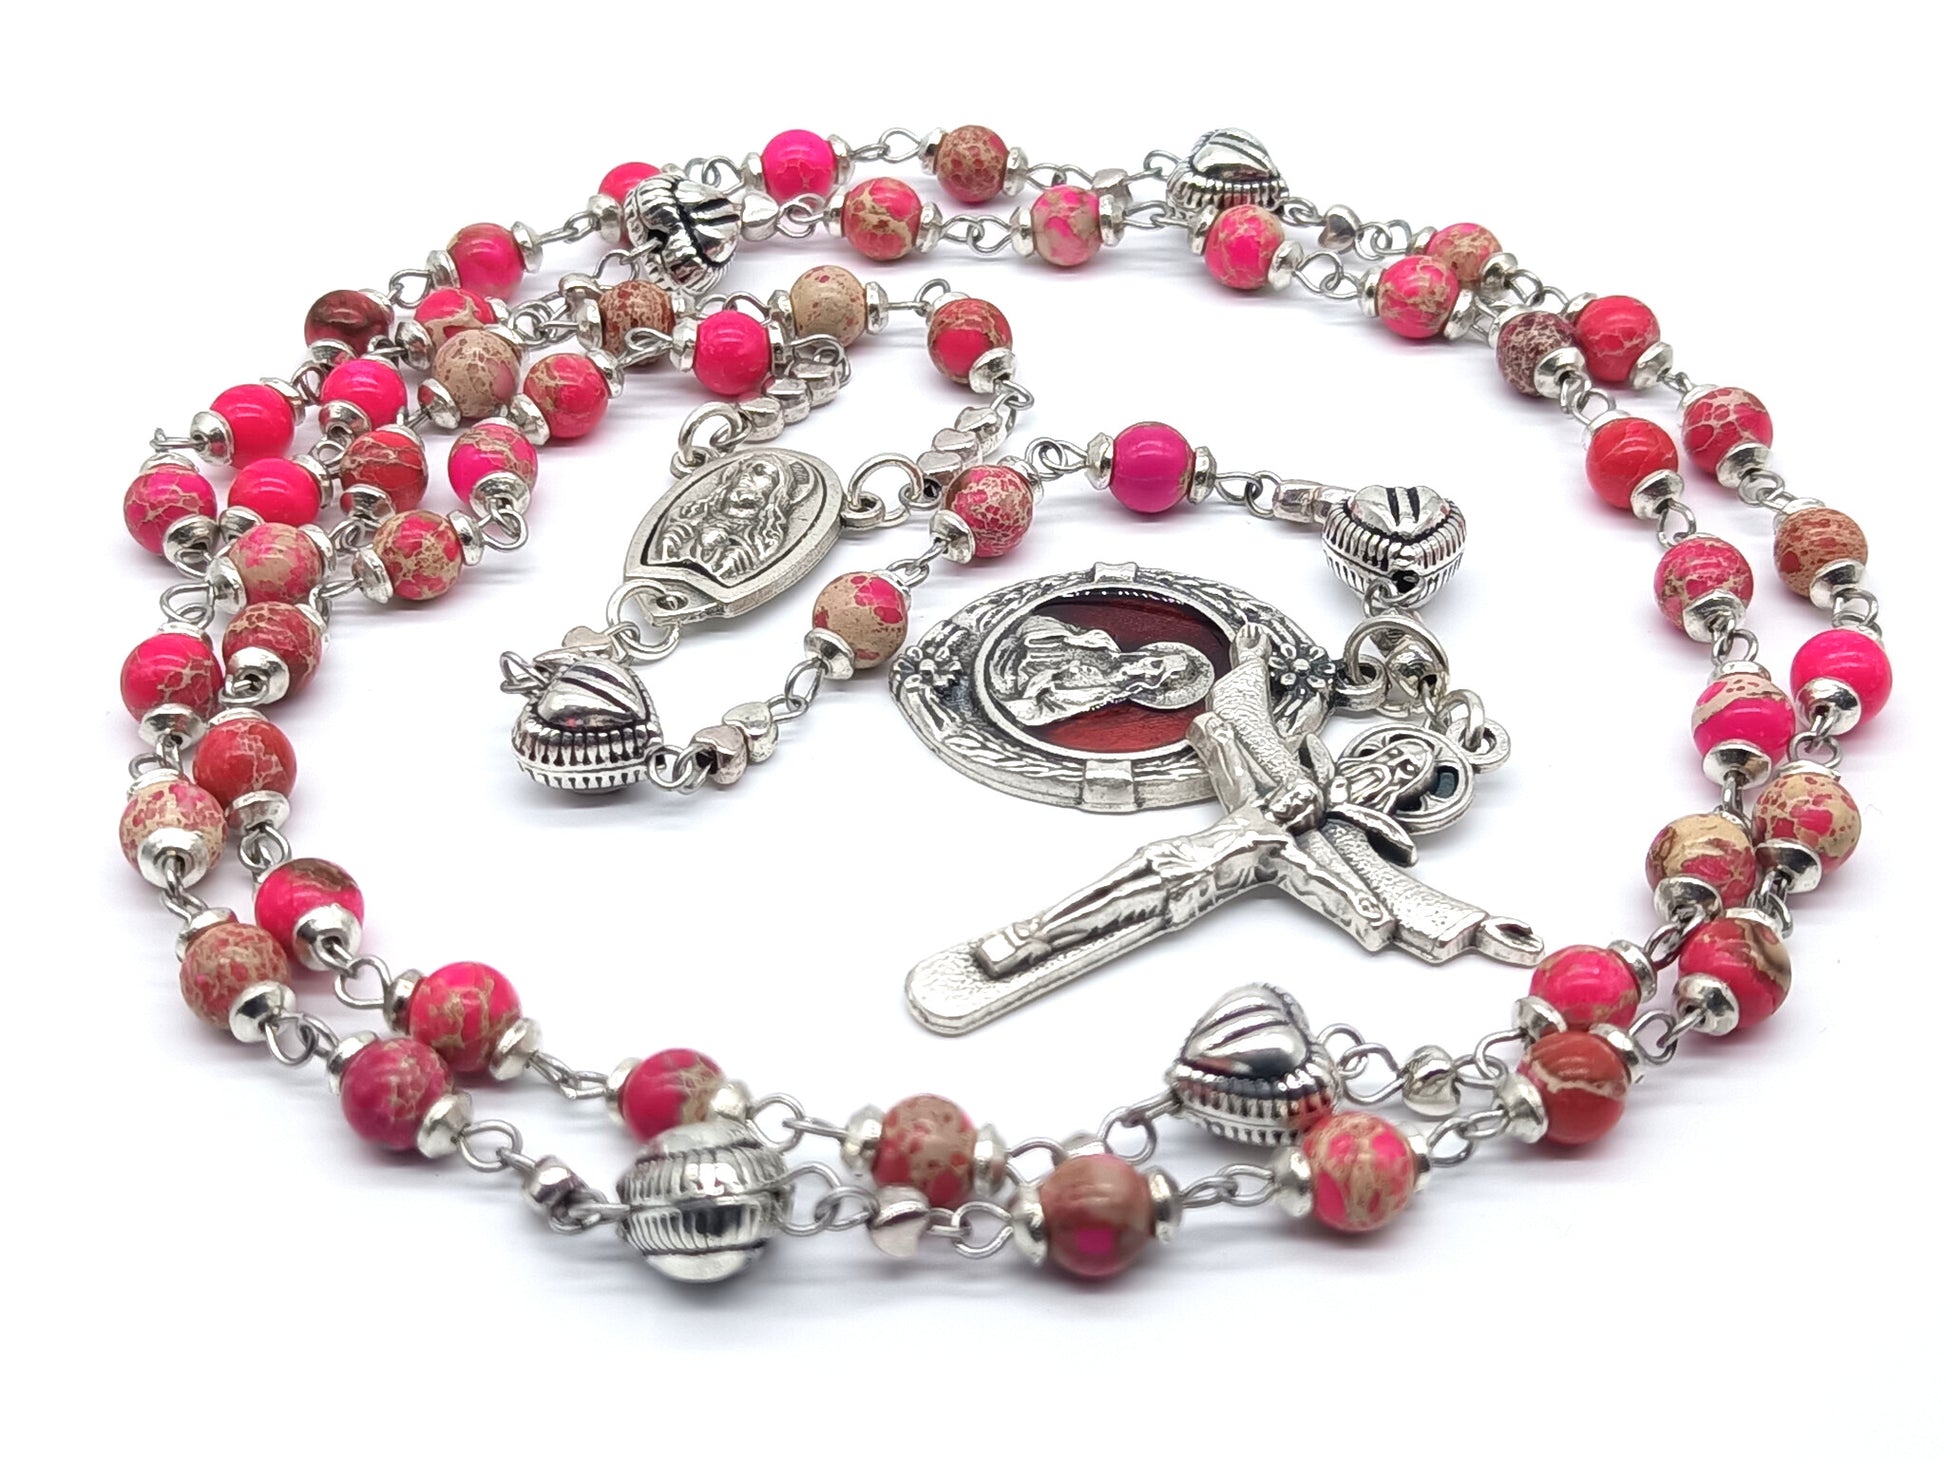 Sacred Heart unique rosary beads with pink gemstone beads, silver crucifix, heart pater beads and Scared Heart medal.